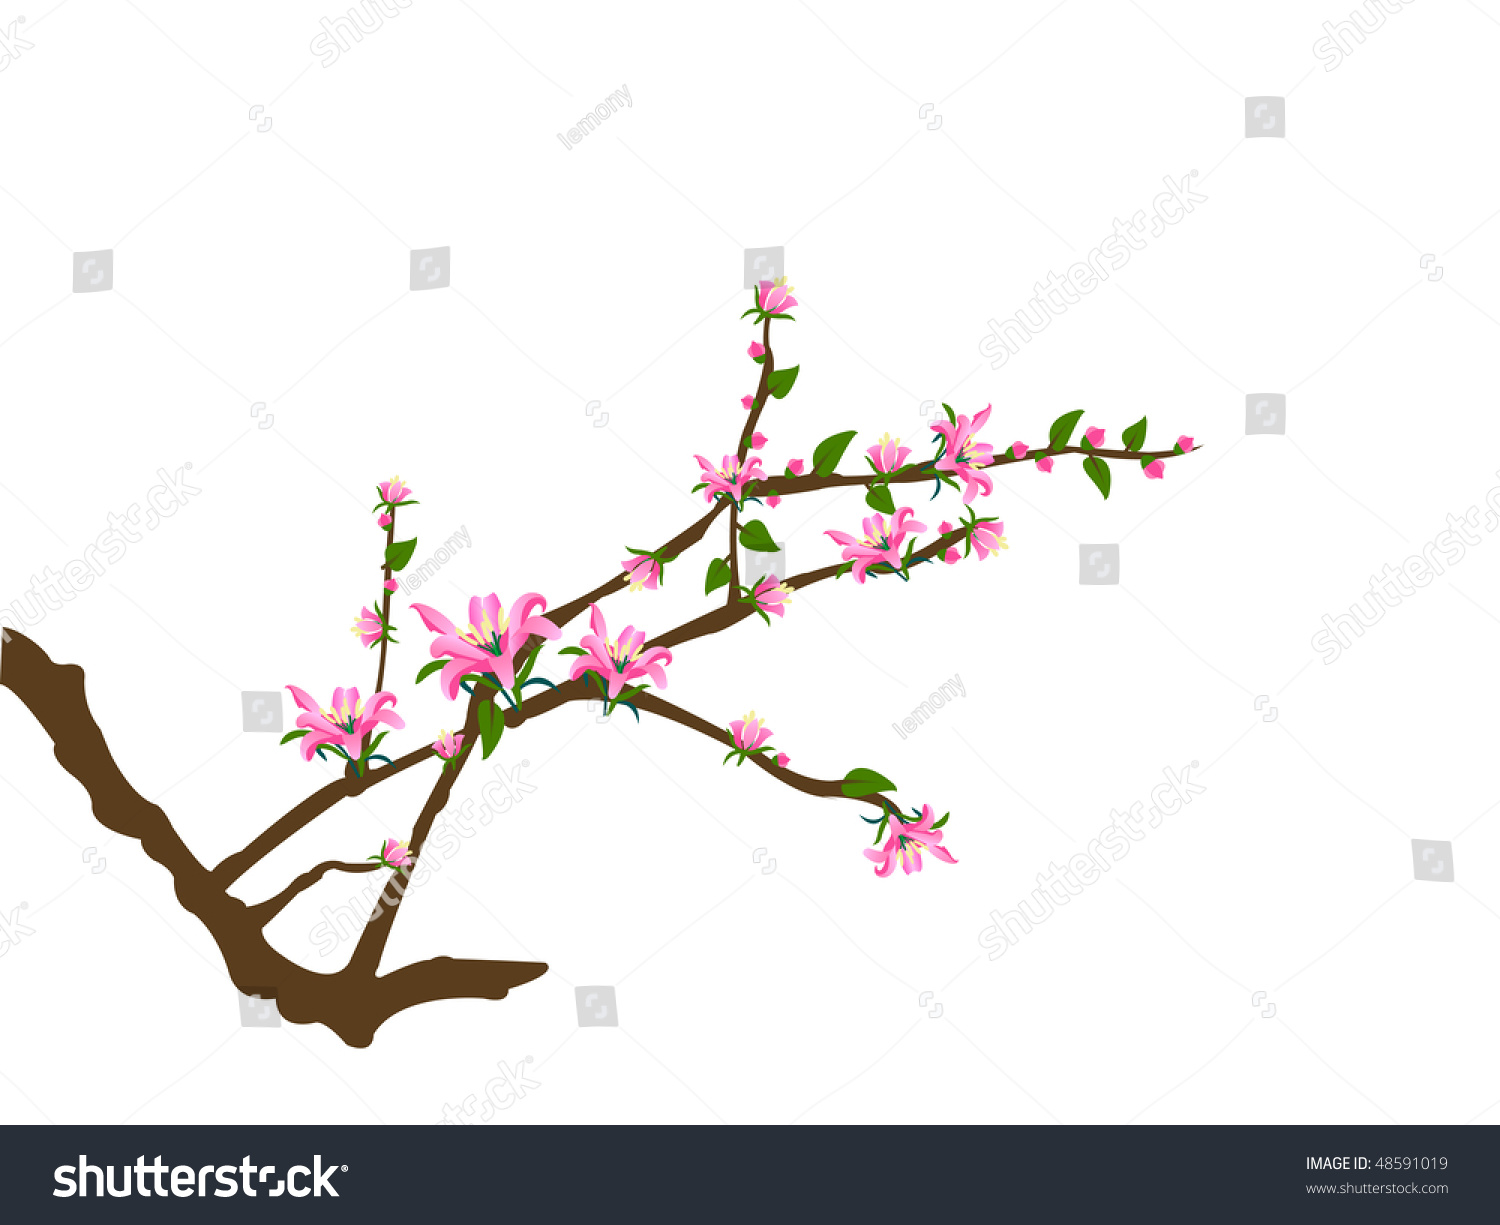 Tree Twigs And Pink Flowers Stock Vector Illustration 48591019